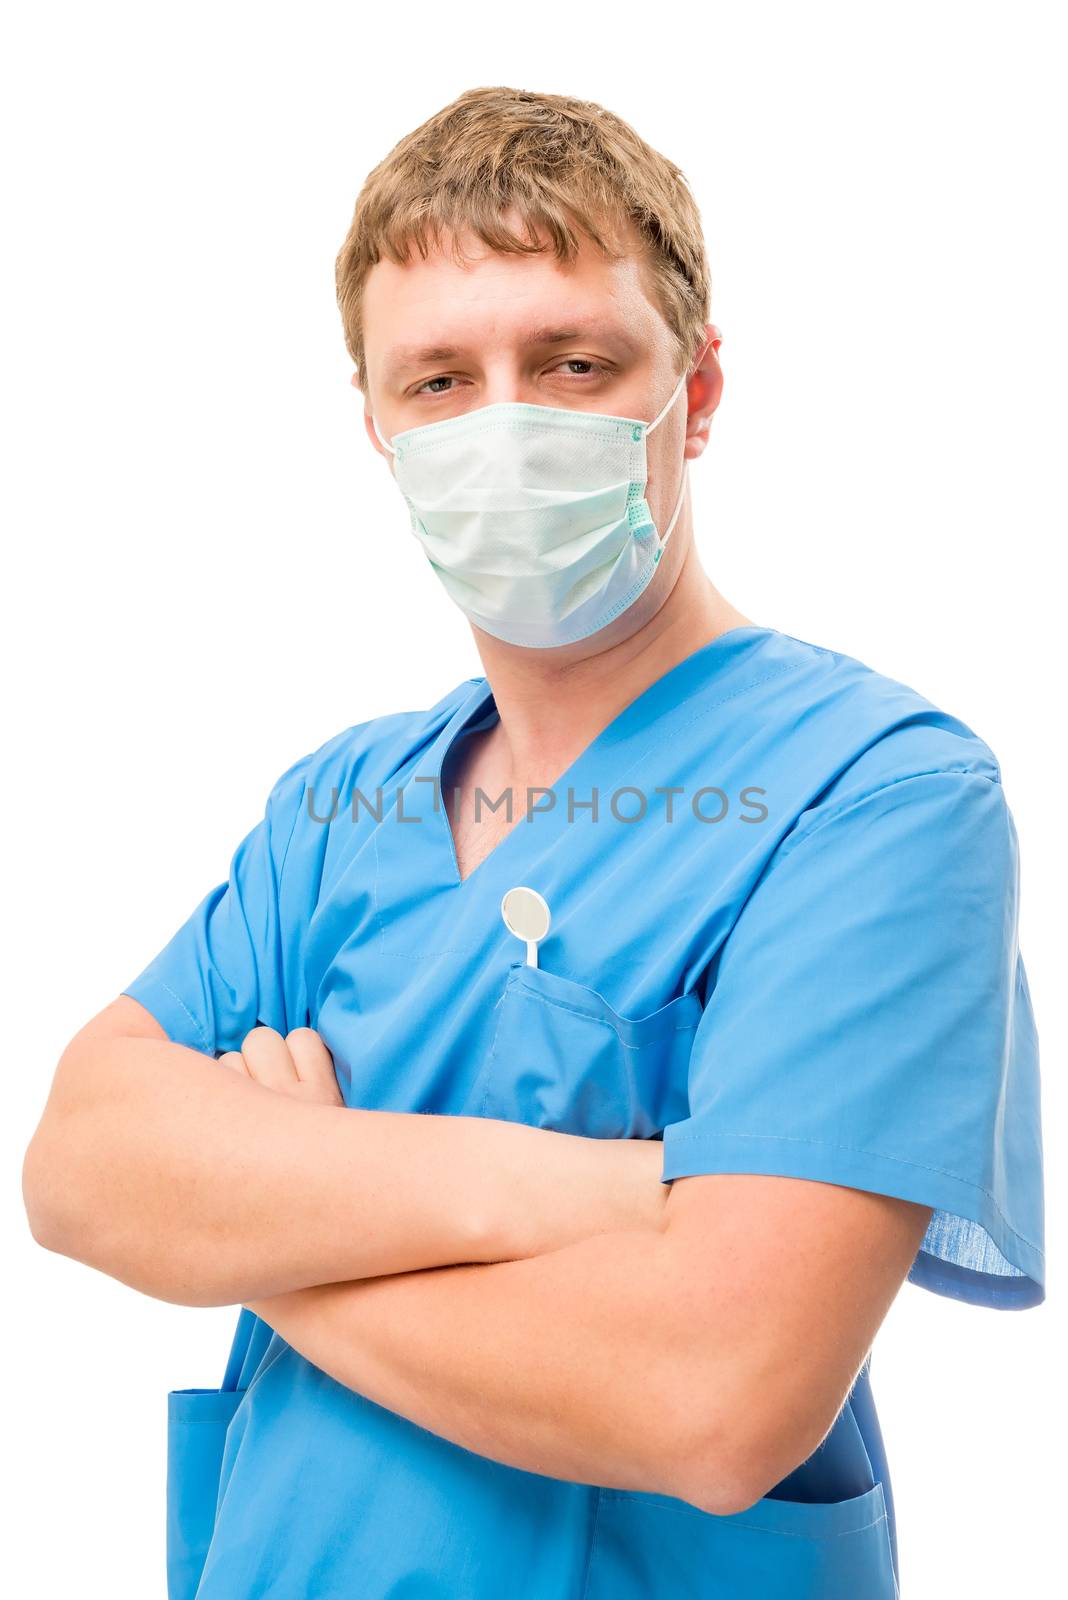 Vertical portrait of the doctor dentist in a mask isolated